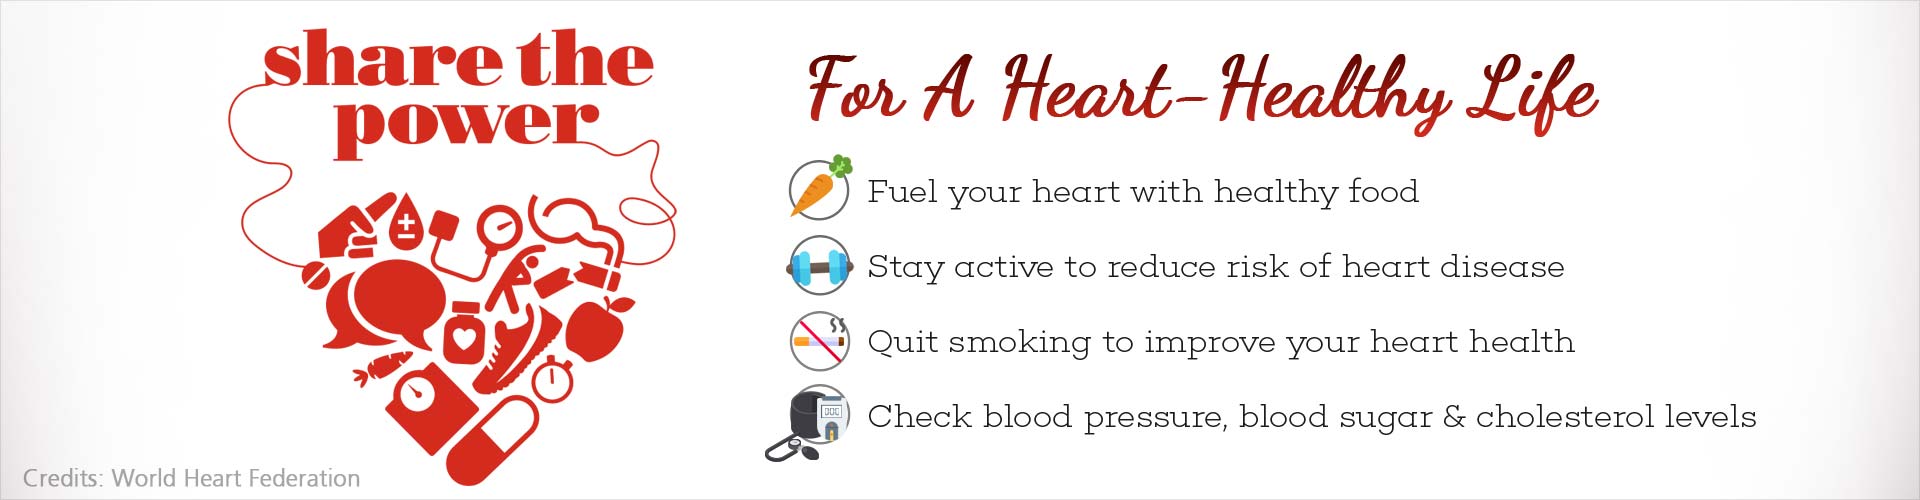 share the power
For A heart health life
- fuel your heart with healthy food
- stay active to reduce risk of heart disease
- quit smoking to improve your heart health
- check blood pressure, blood sugar and cholesterol levels